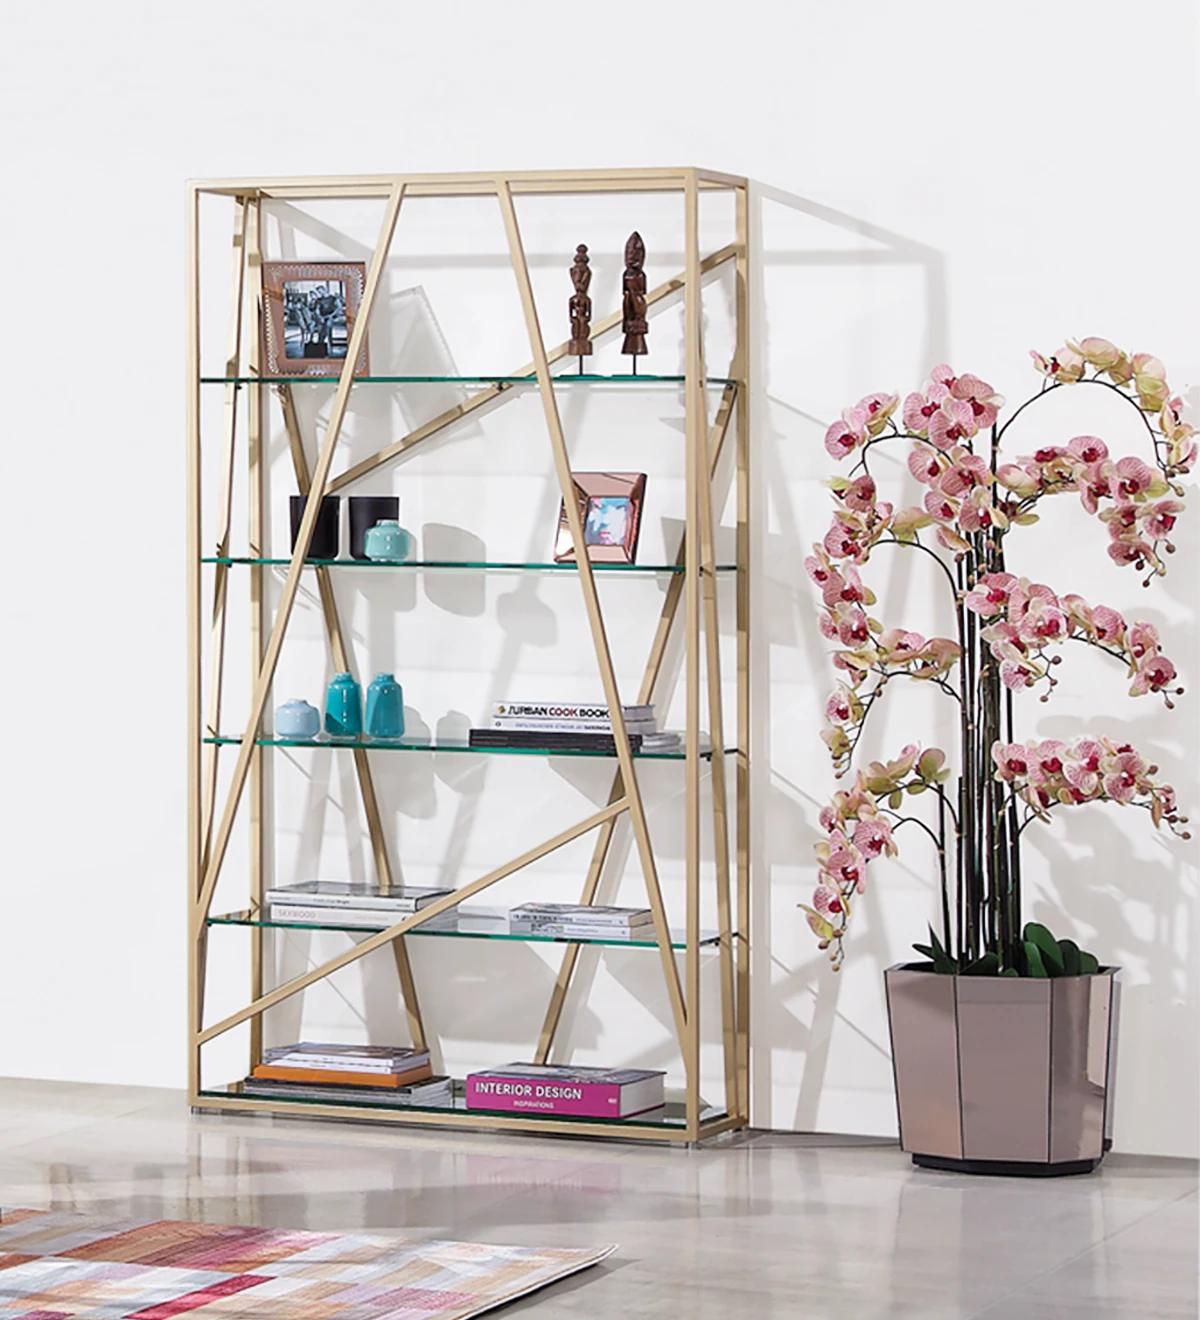 Bookcase with gold lacquered metal structure and 5 clear glass shelves.